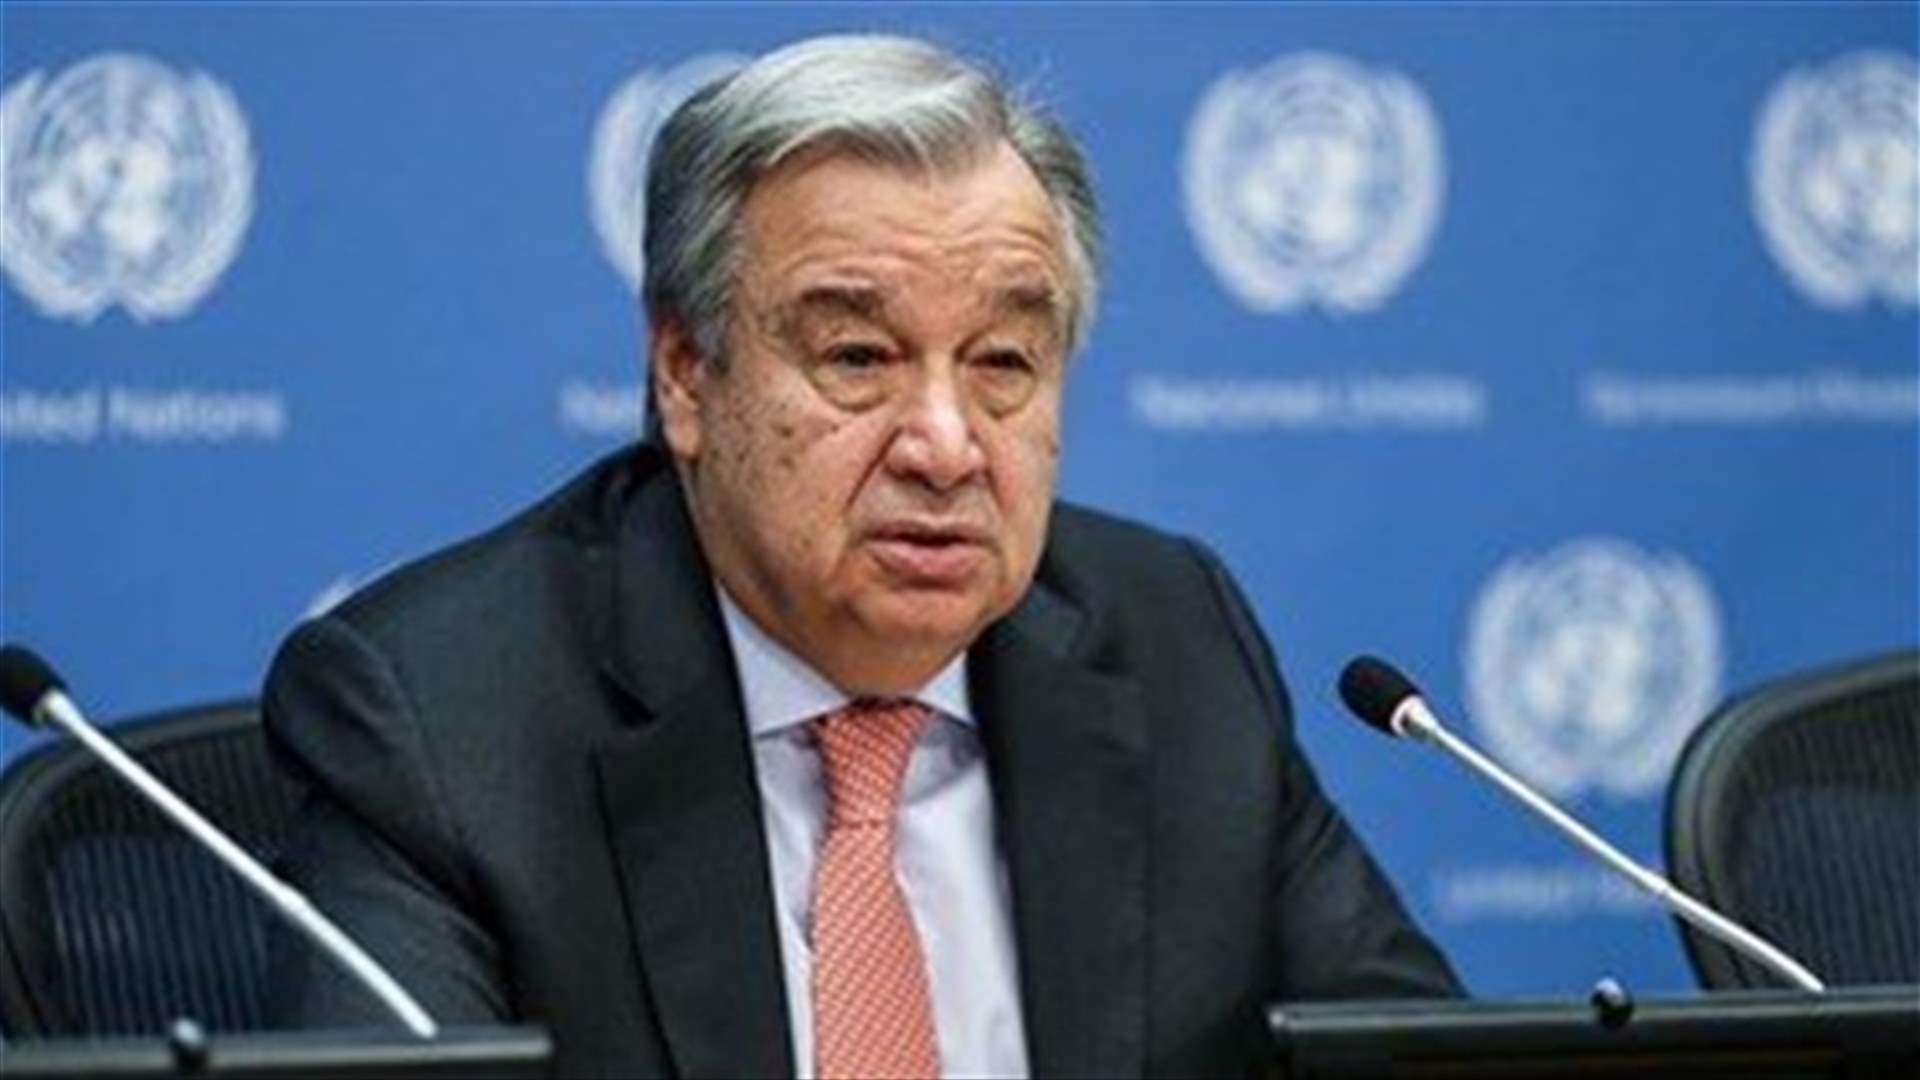 Guterres: International community ready to help Lebanon if required reforms were accomplished